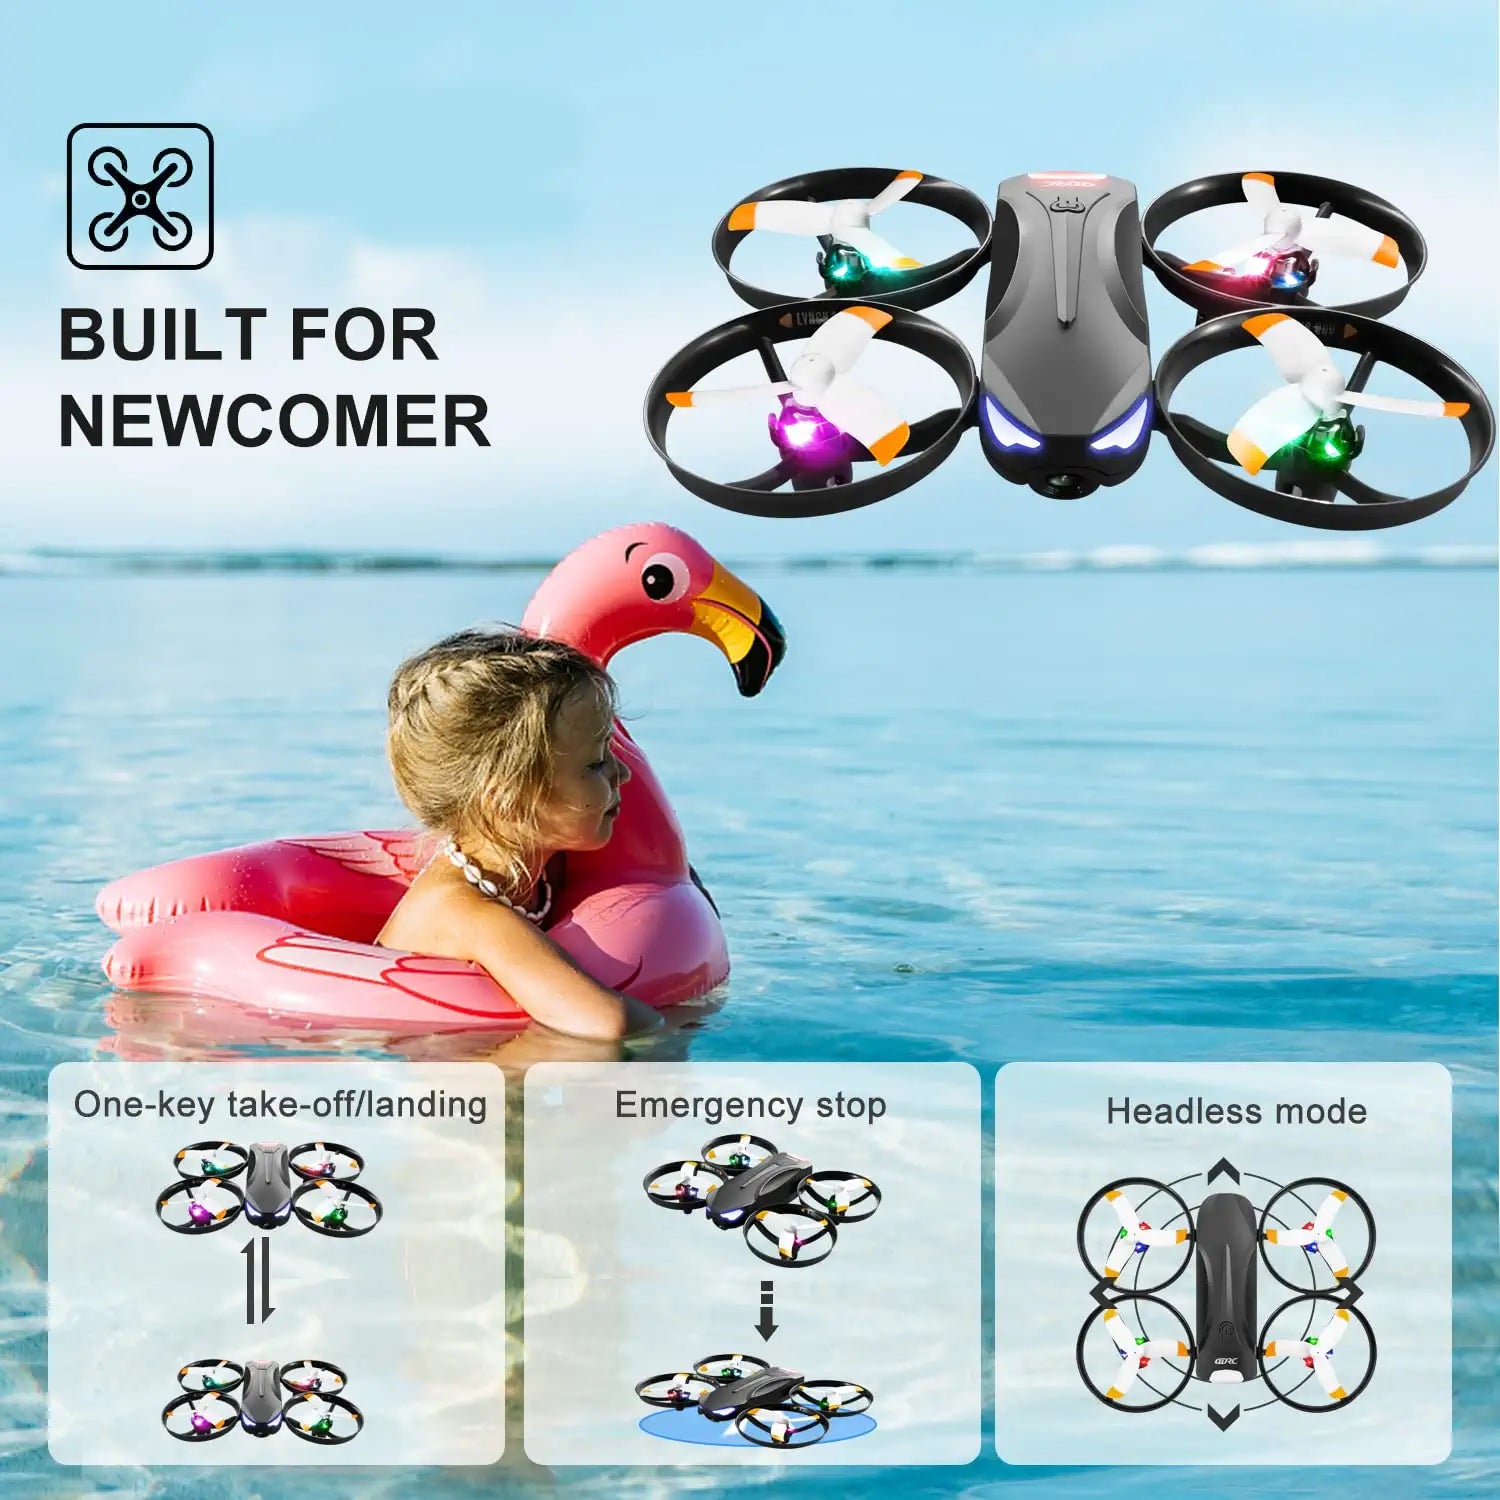 4DRC V16 Drone - with Camera for Kids,1080P FPV Camera Mini RC Quadcopter Beginners Toy with 7 Colors LED Lights,3D Flips,Gesture Selfie,Headless Mode,Altitude Hold,Boys Girls Birthday Gifts - RCDrone